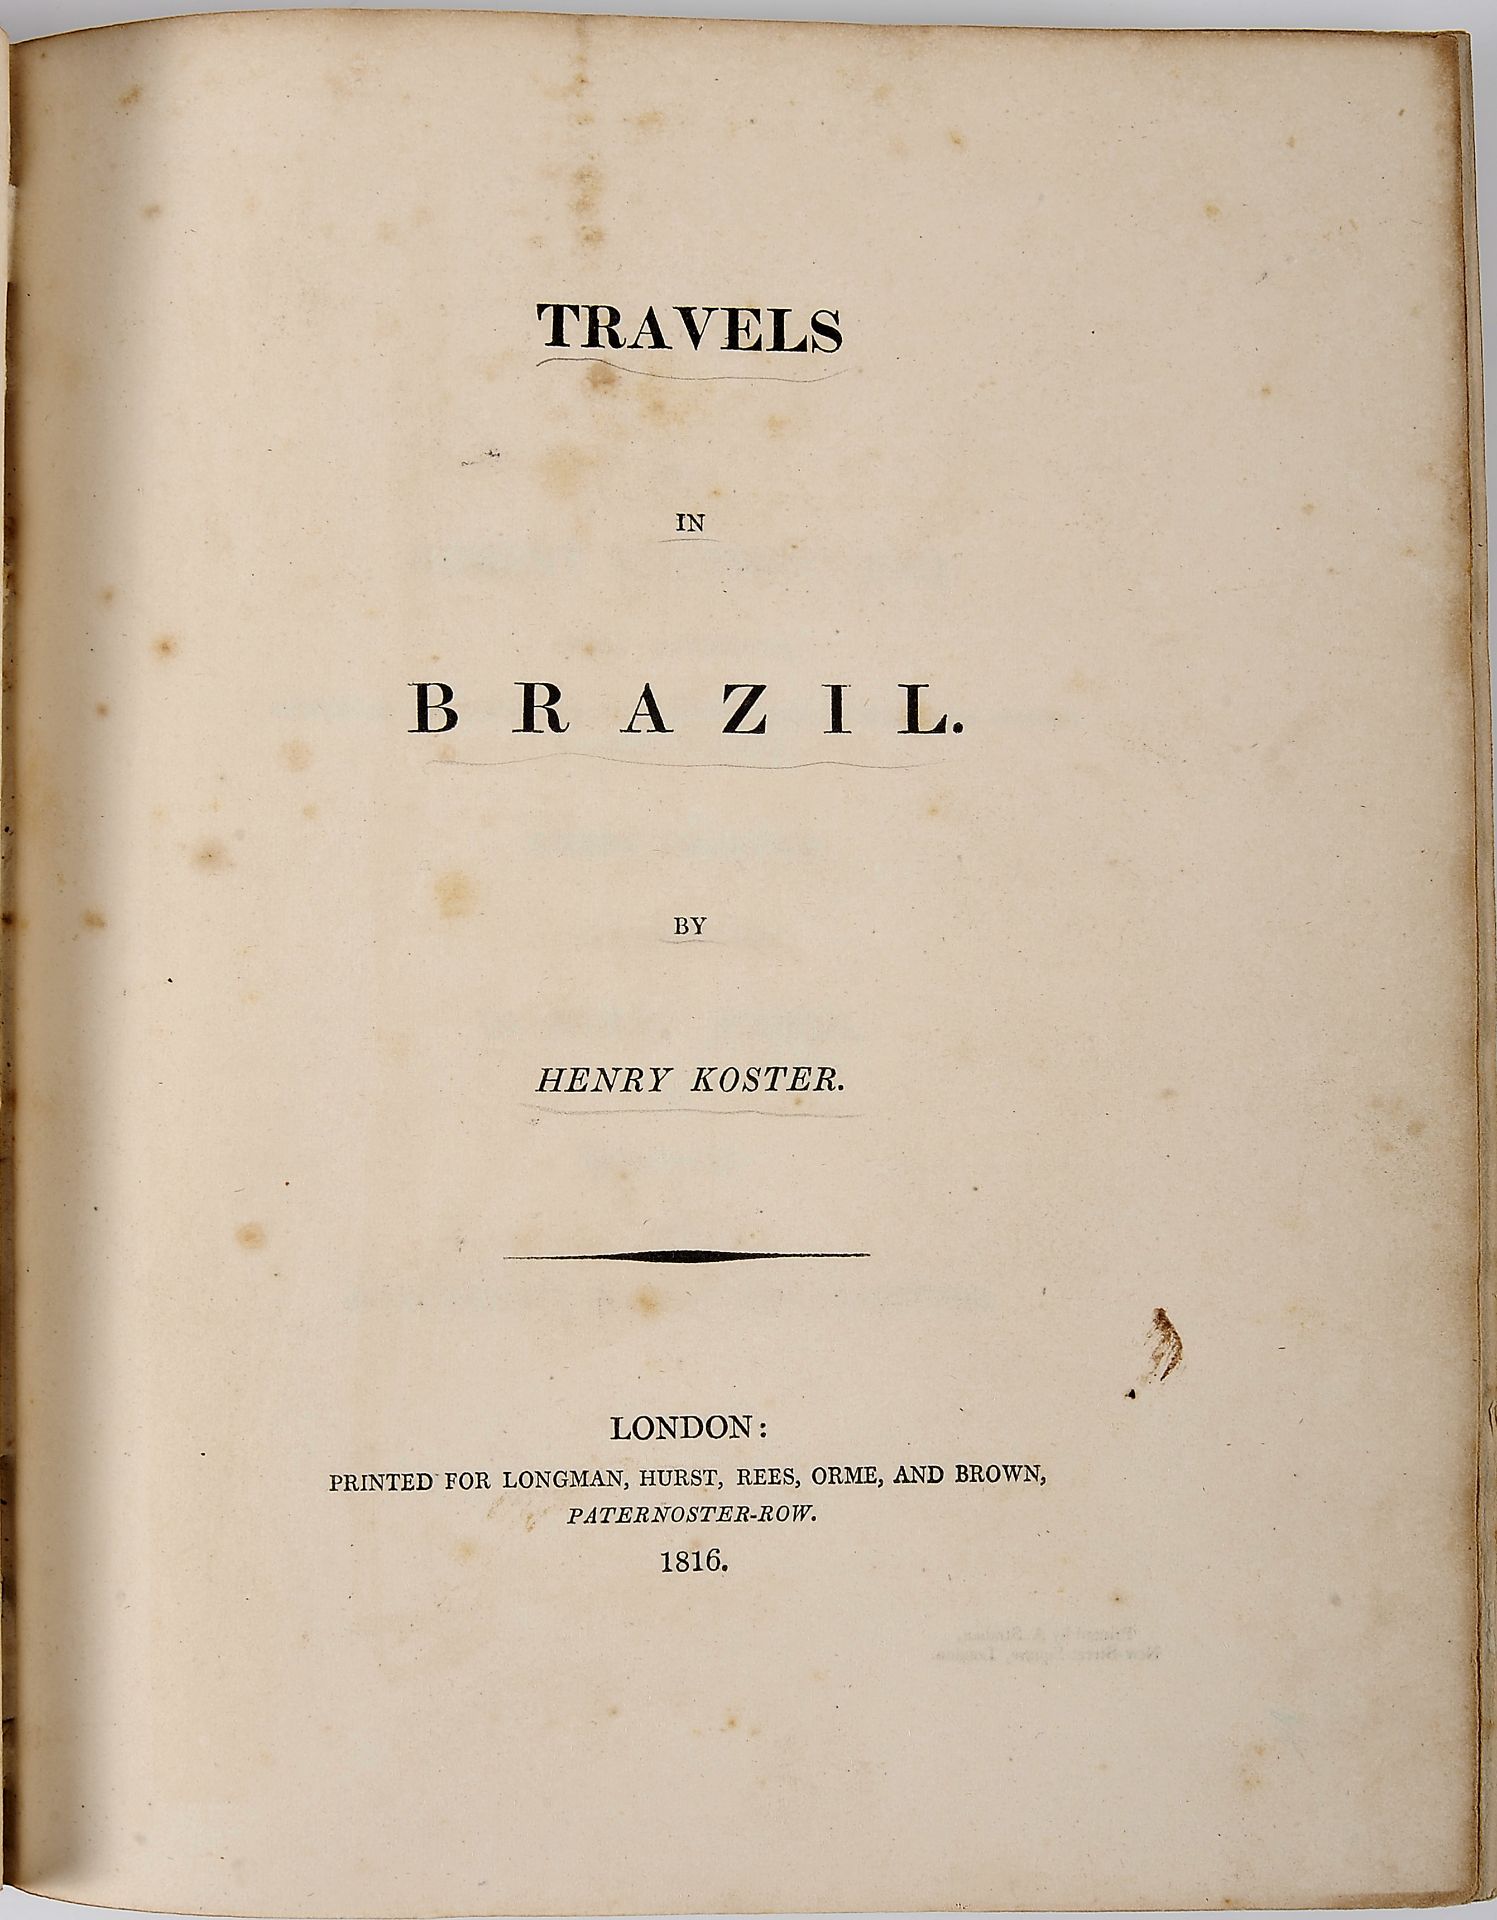 KOSTER, Henry.- Travels in Brazil.- London: Longman, Hurst, Rees, Orme and Brown, 1816.- IX, [3], 50